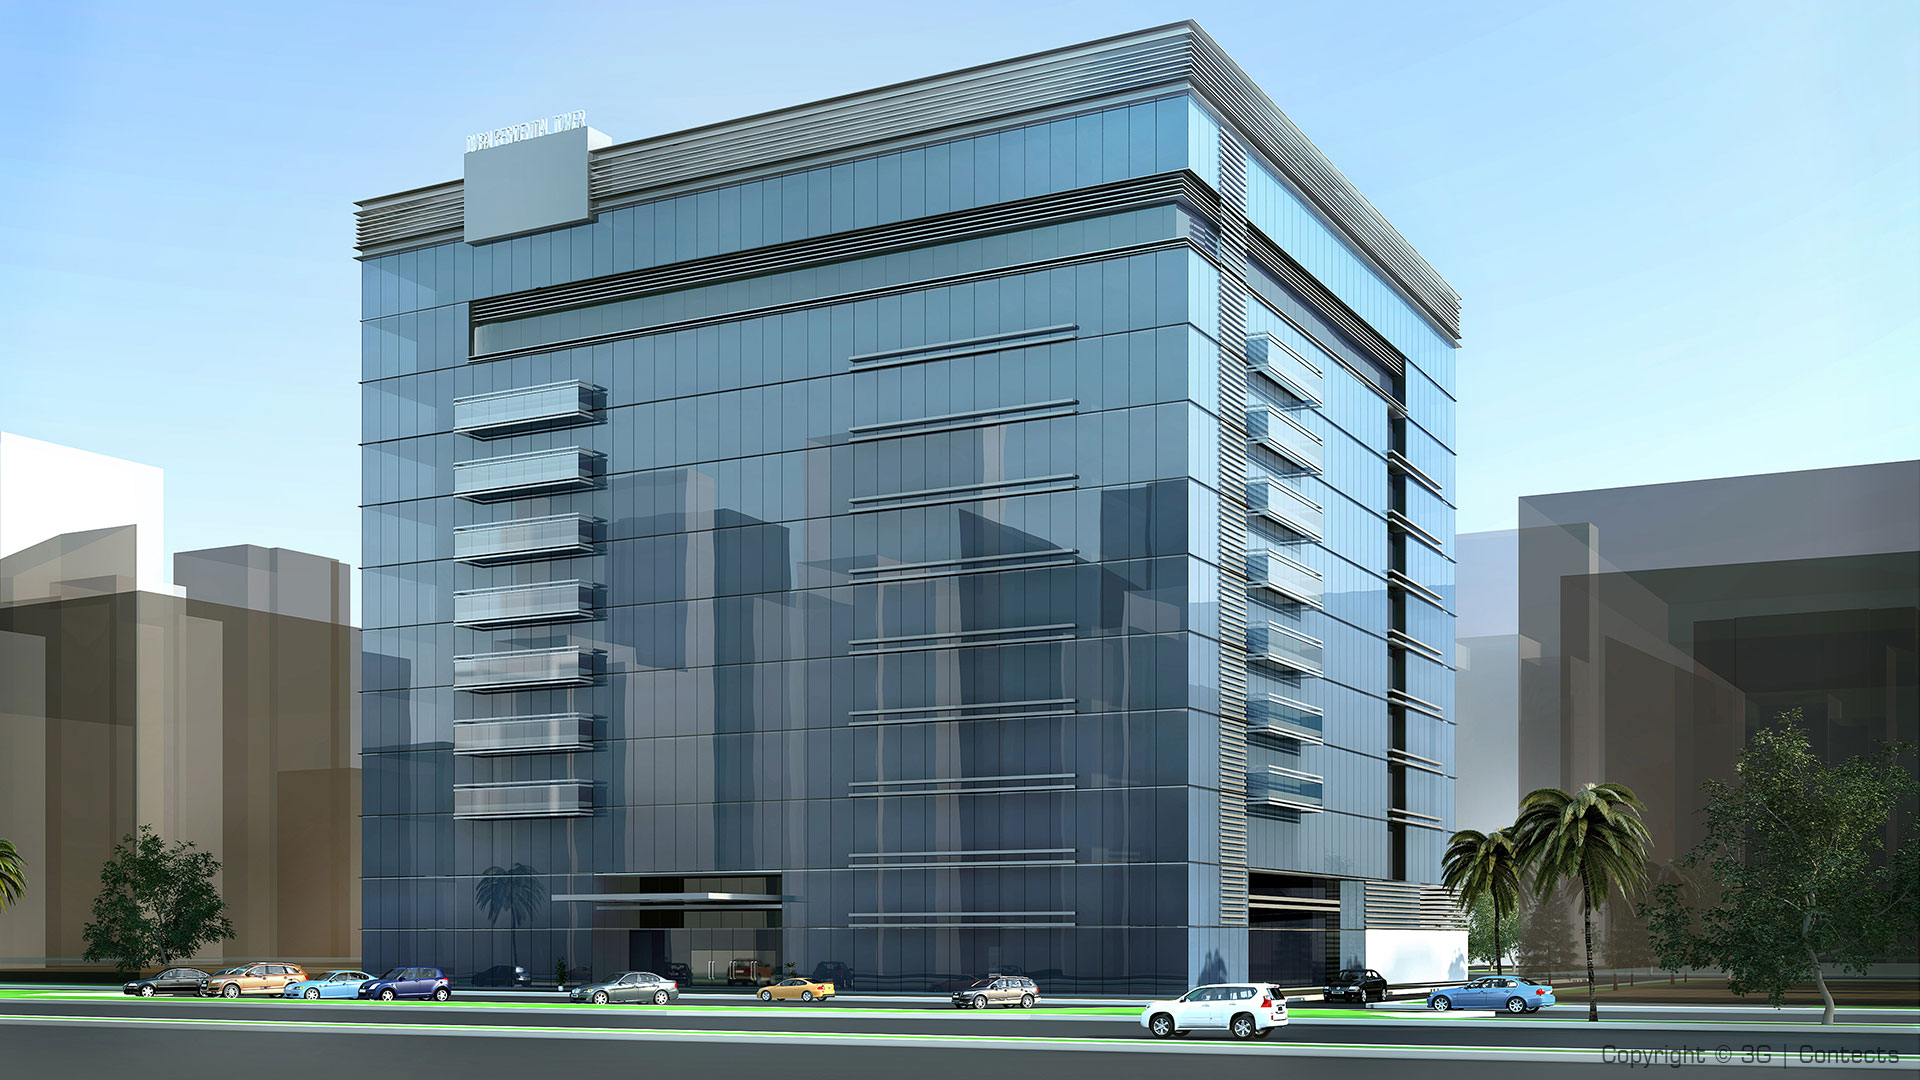 Tabouk SAPL Infrastructure and Residential Project